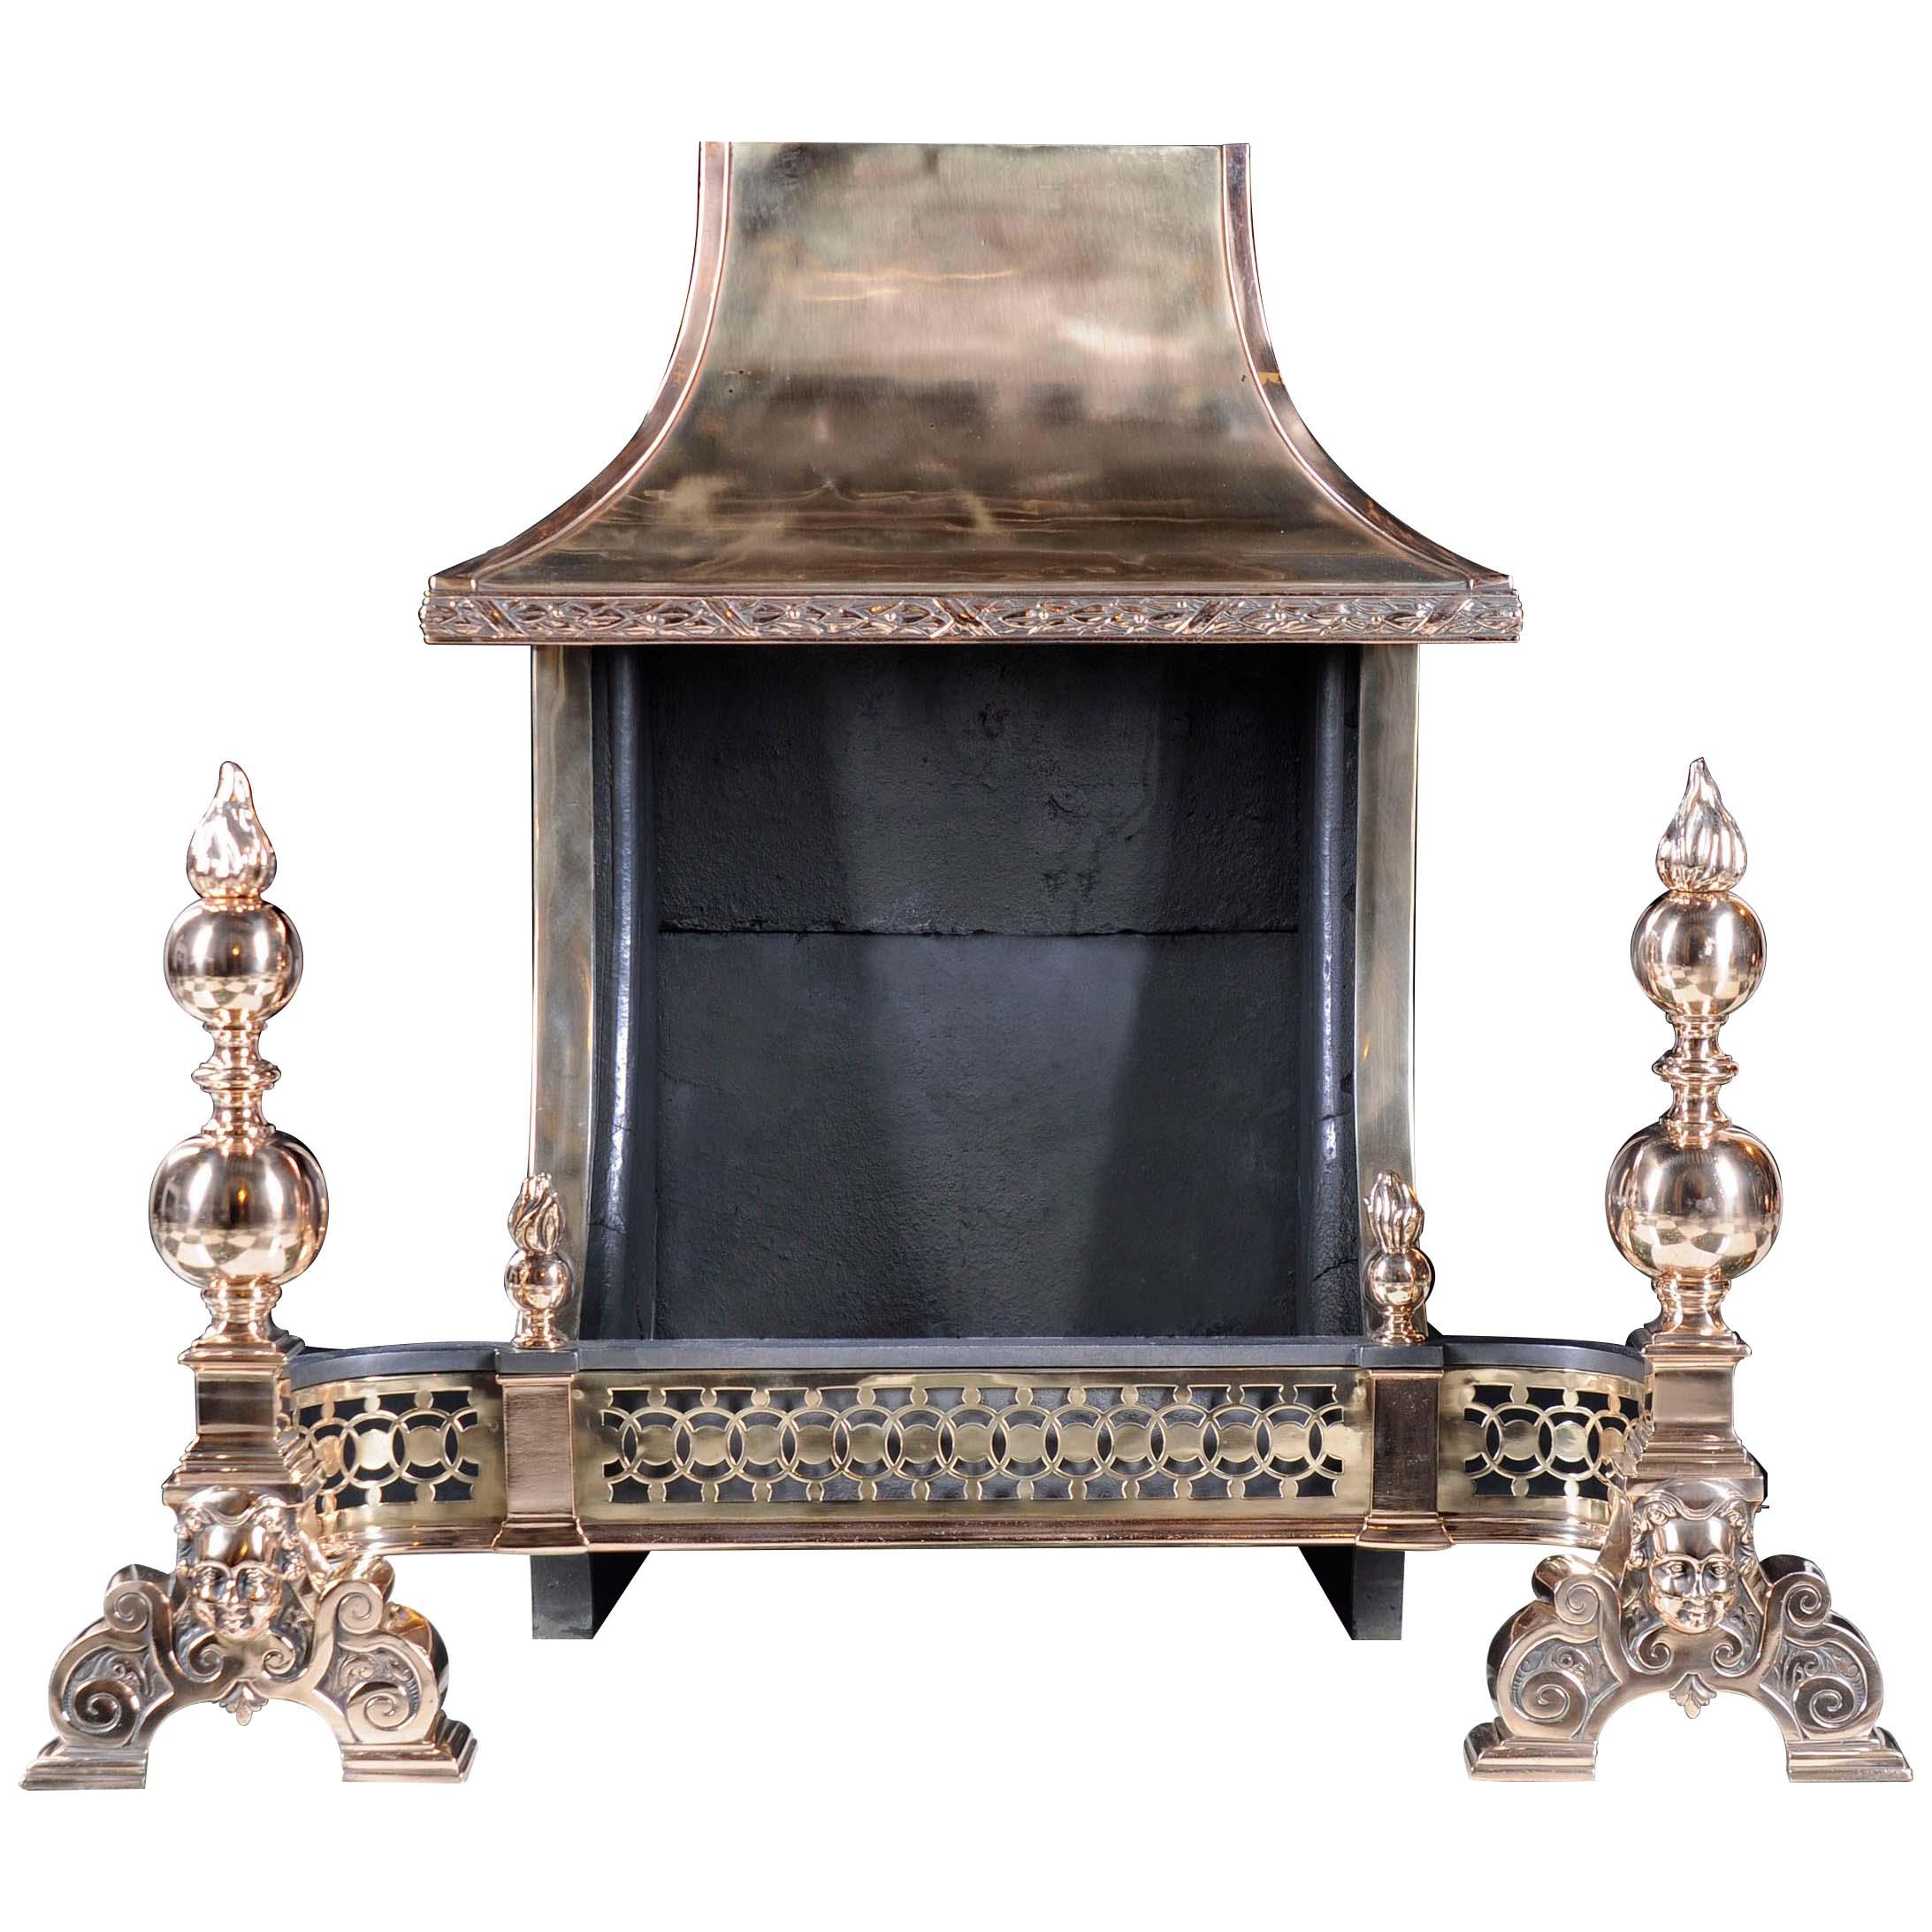 A Baroque Style Hooded Victorian Fire Grate